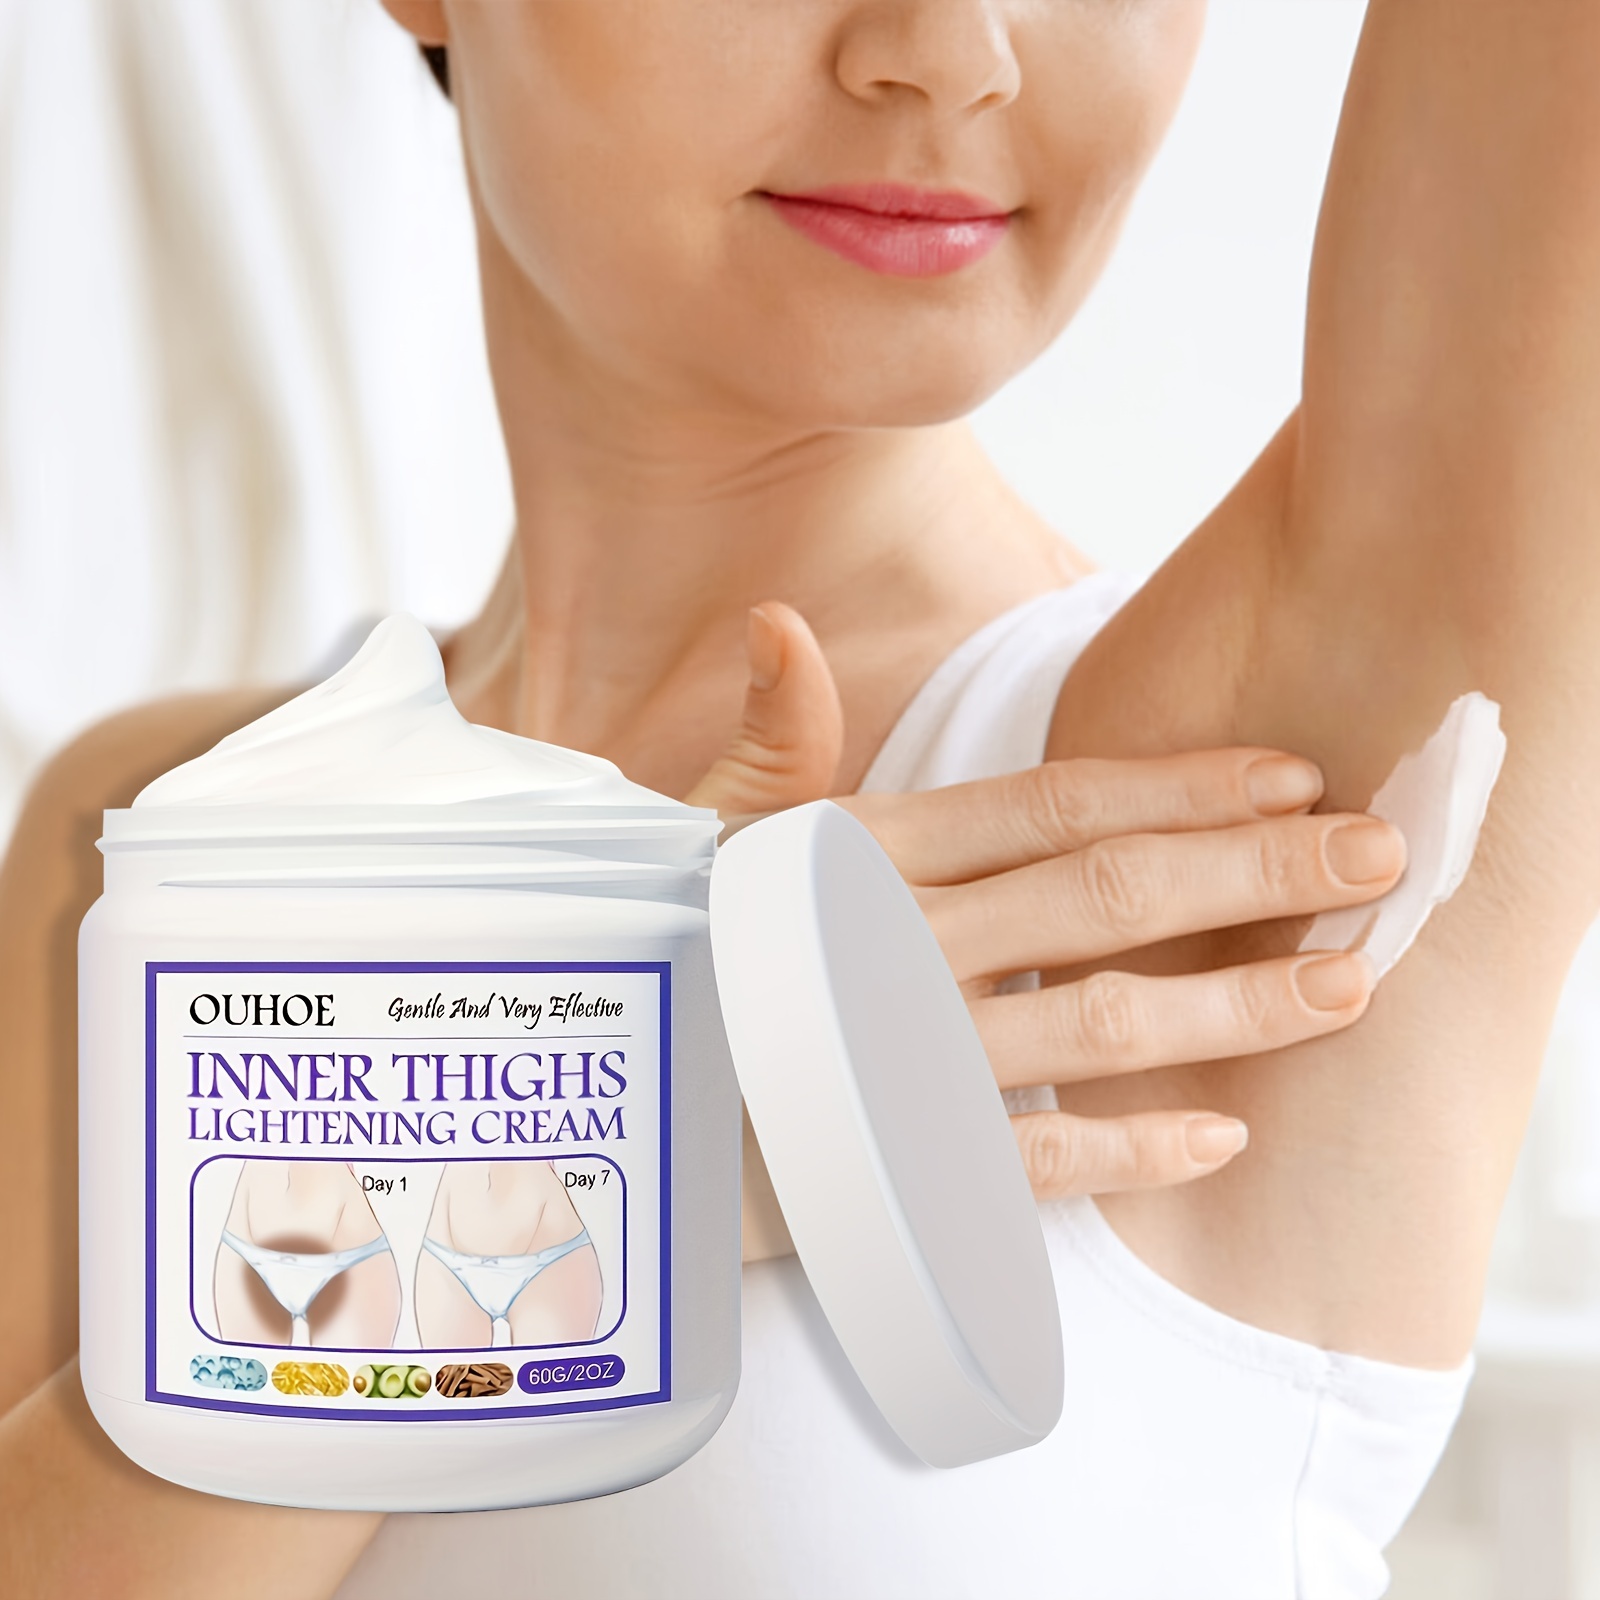 Shop Underarm Inner Thigh Whitening Cream with great discounts and